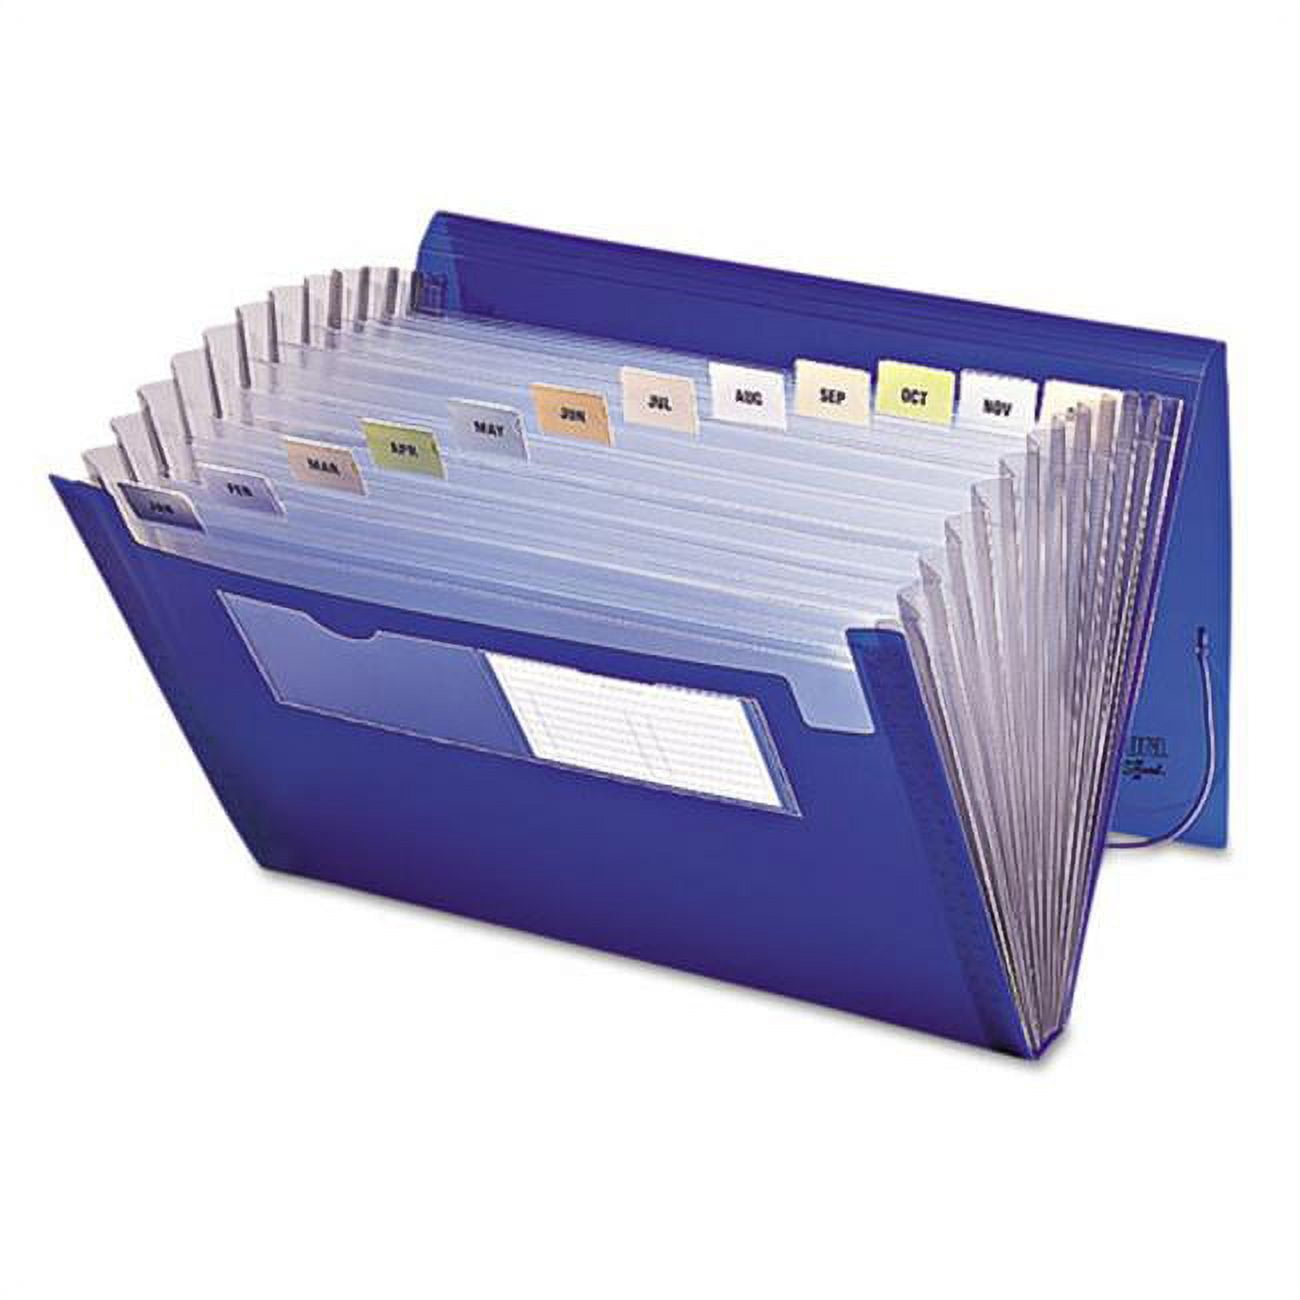 Wholesale PC528-06 MP Polypropylene Display Book Folder with Spiral and  Elastic Bands, 20 sleeves, Blue Manufacturer and Supplier